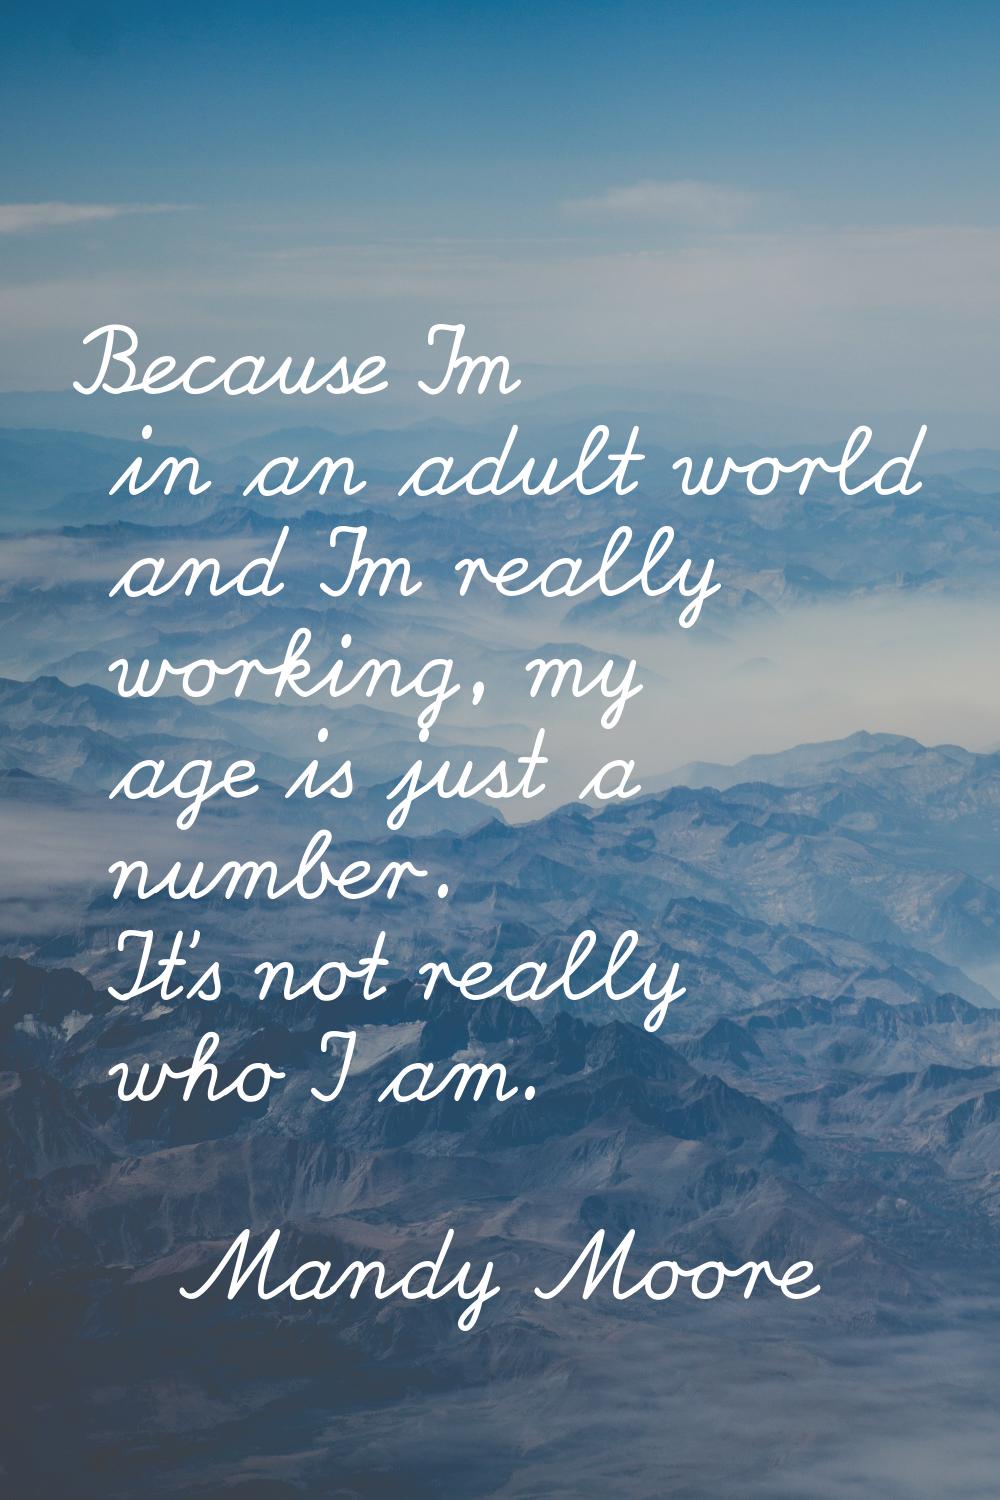 Because I'm in an adult world and I'm really working, my age is just a number. It's not really who 